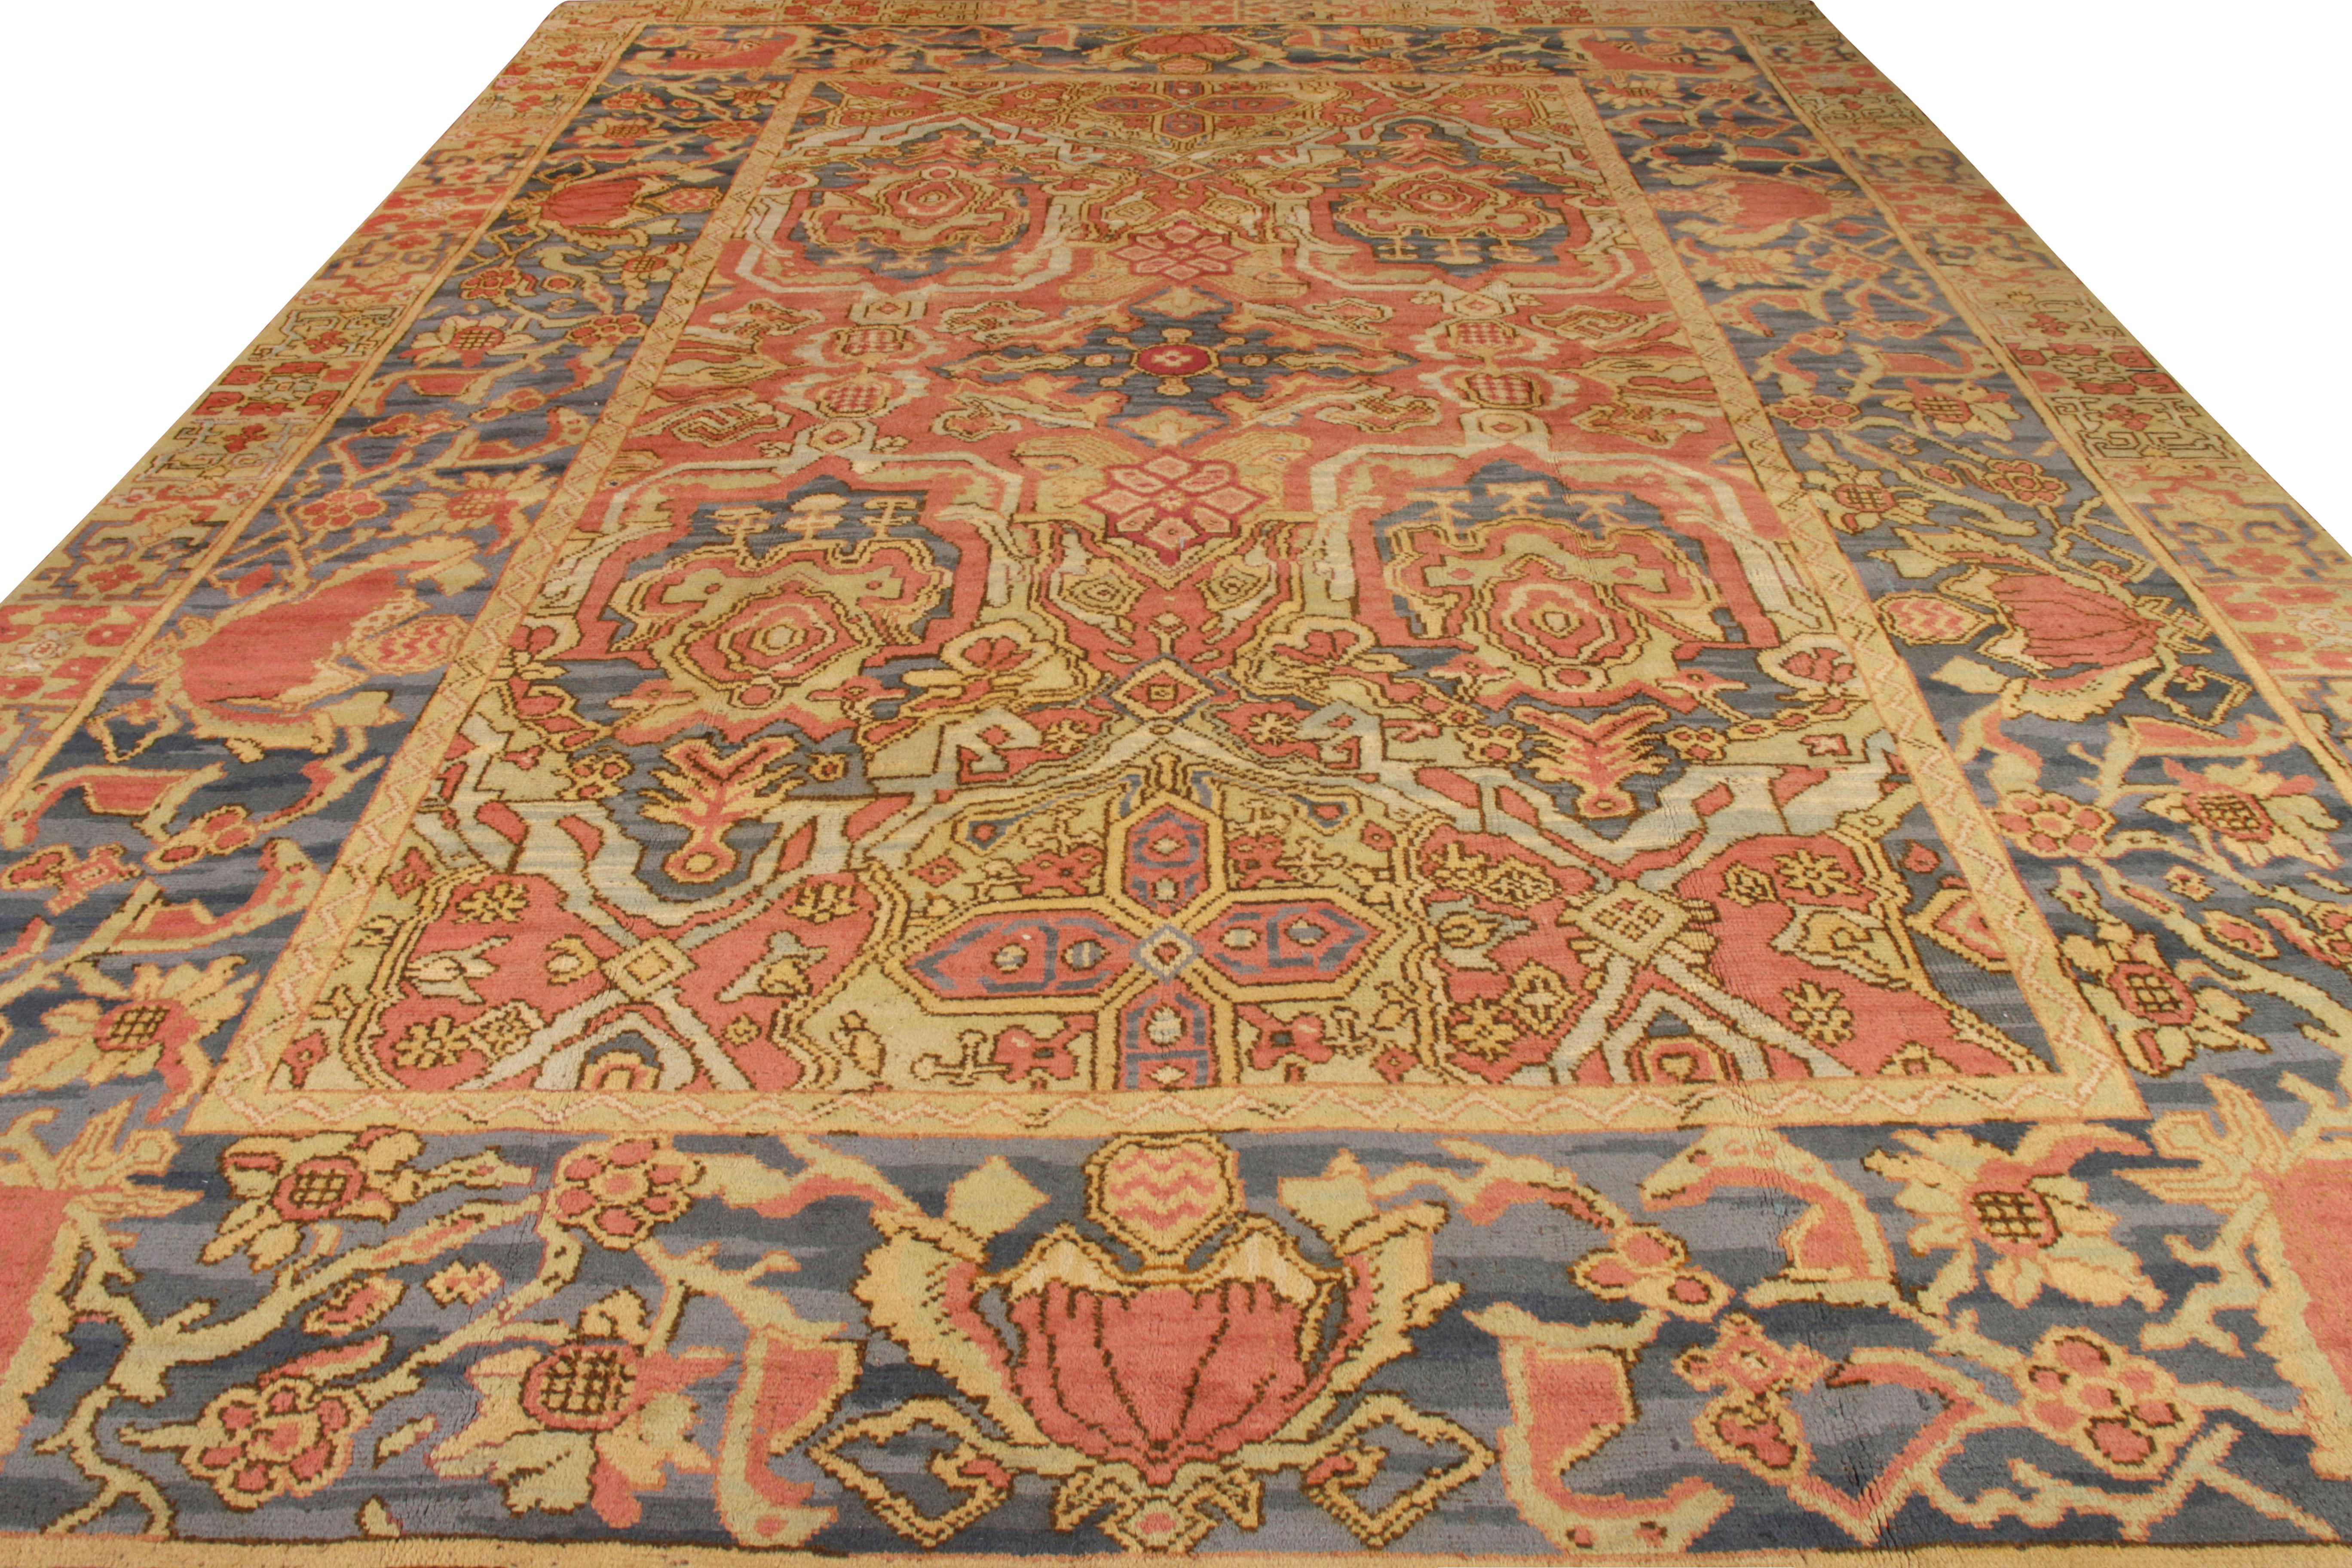 Hand knotted in wool, this very special Arts & Crafts 12 x 17 rug joins Rug & Kilim’s Antique & Vintage collection. Originating from Spain circa 1900-1910, this beautiful piece embodies a unique aesthetic belonging to its era. The rug draws